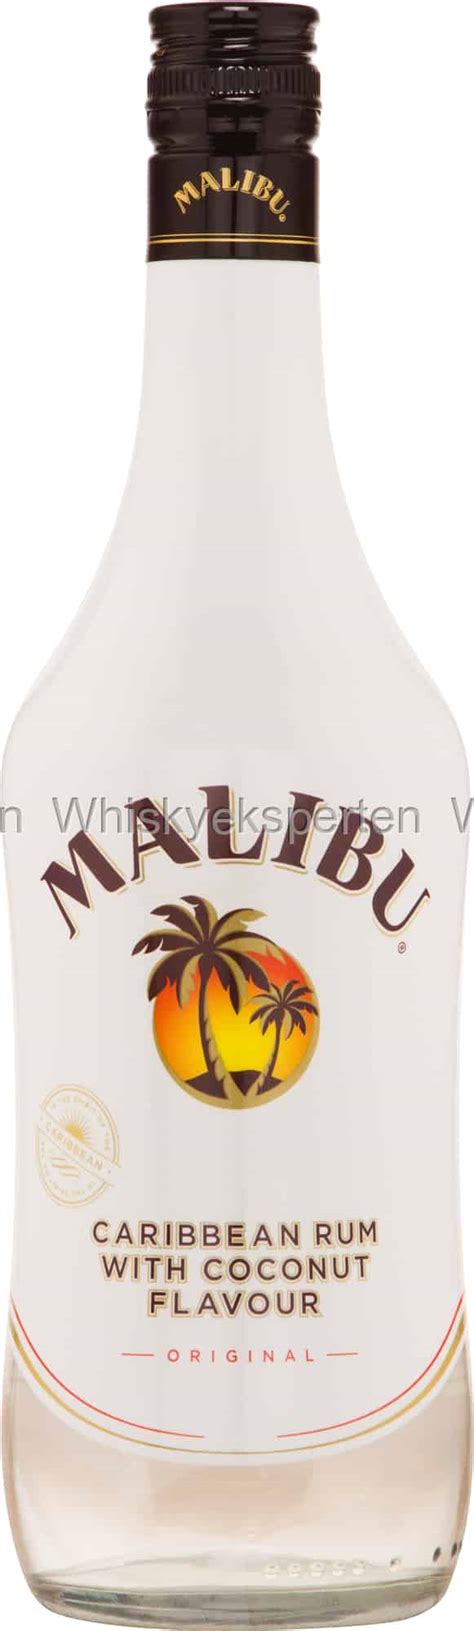 Add vanilla, coconut extract and vanilla bean and mix until combined. Malibu | Caribbean Rum With Coconut Flavour